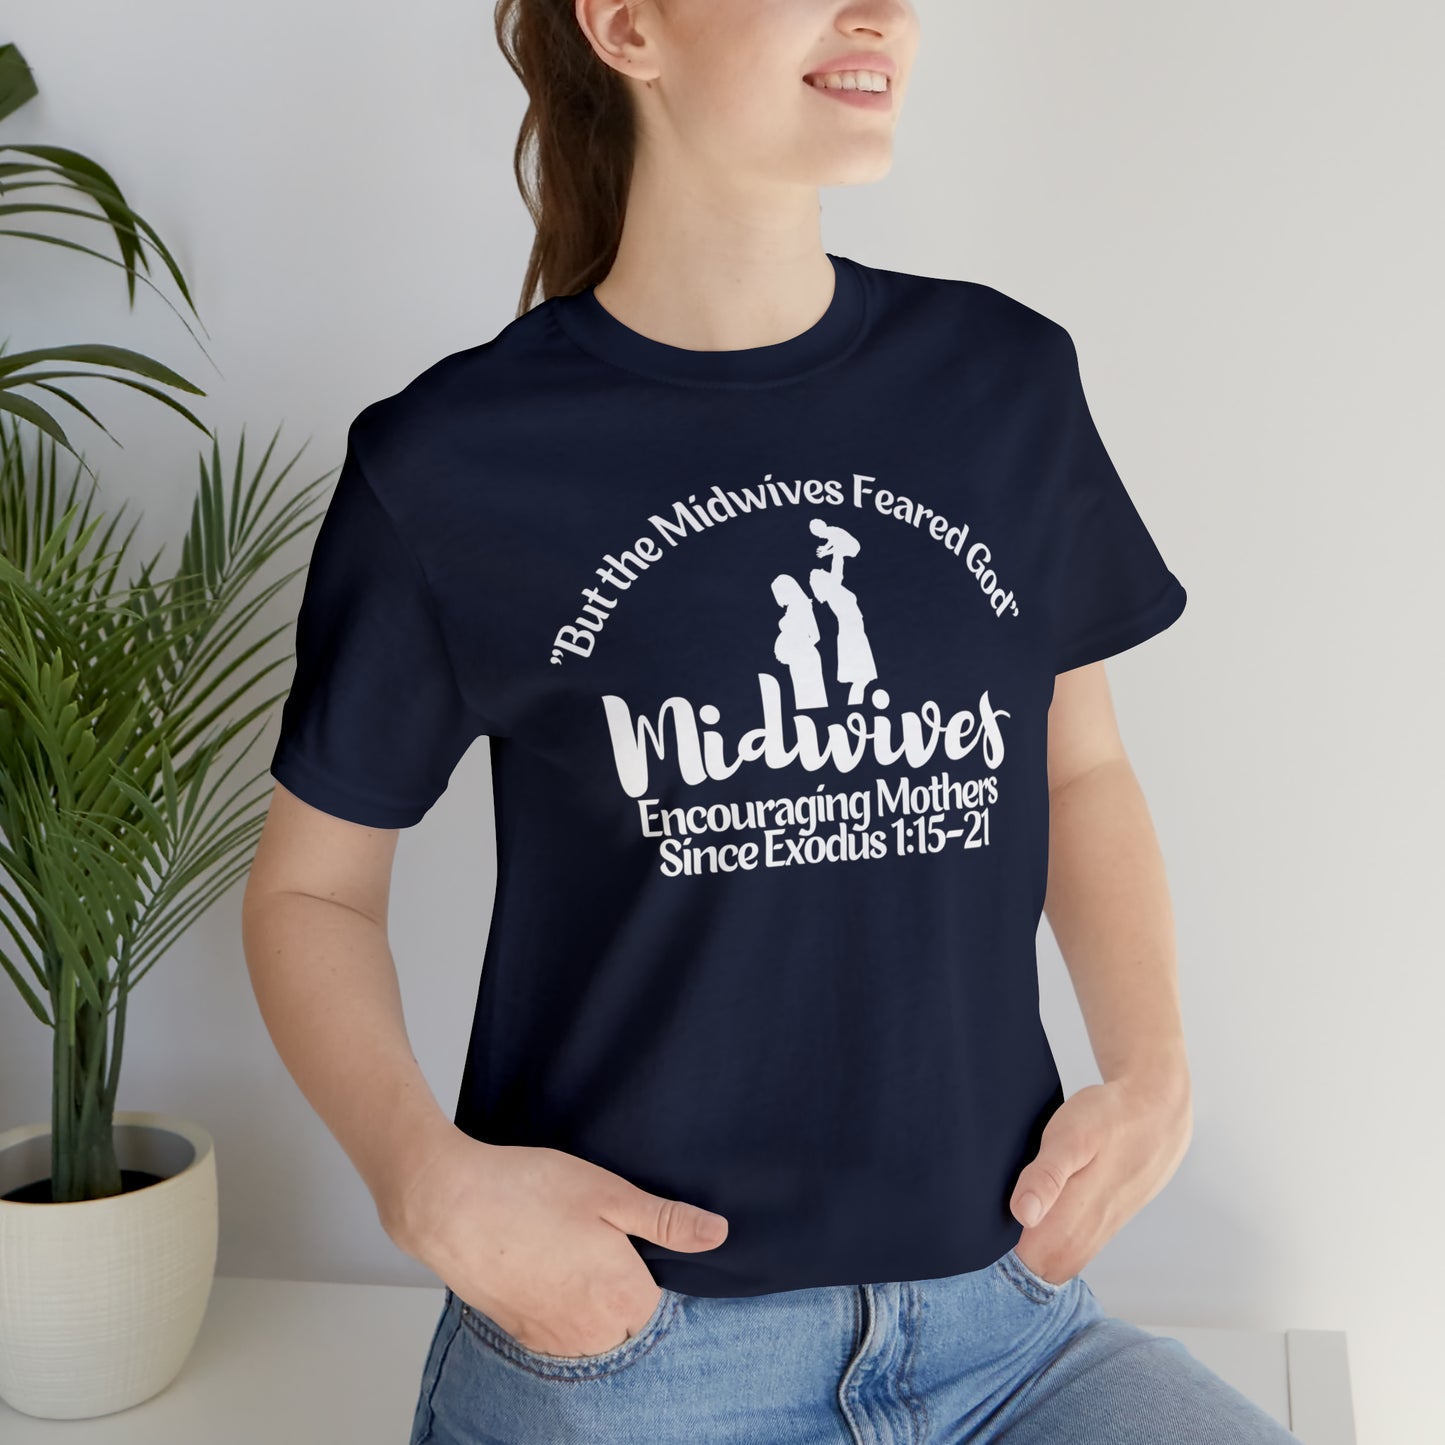 Midwives of Faith (Green Pastures Apparel)